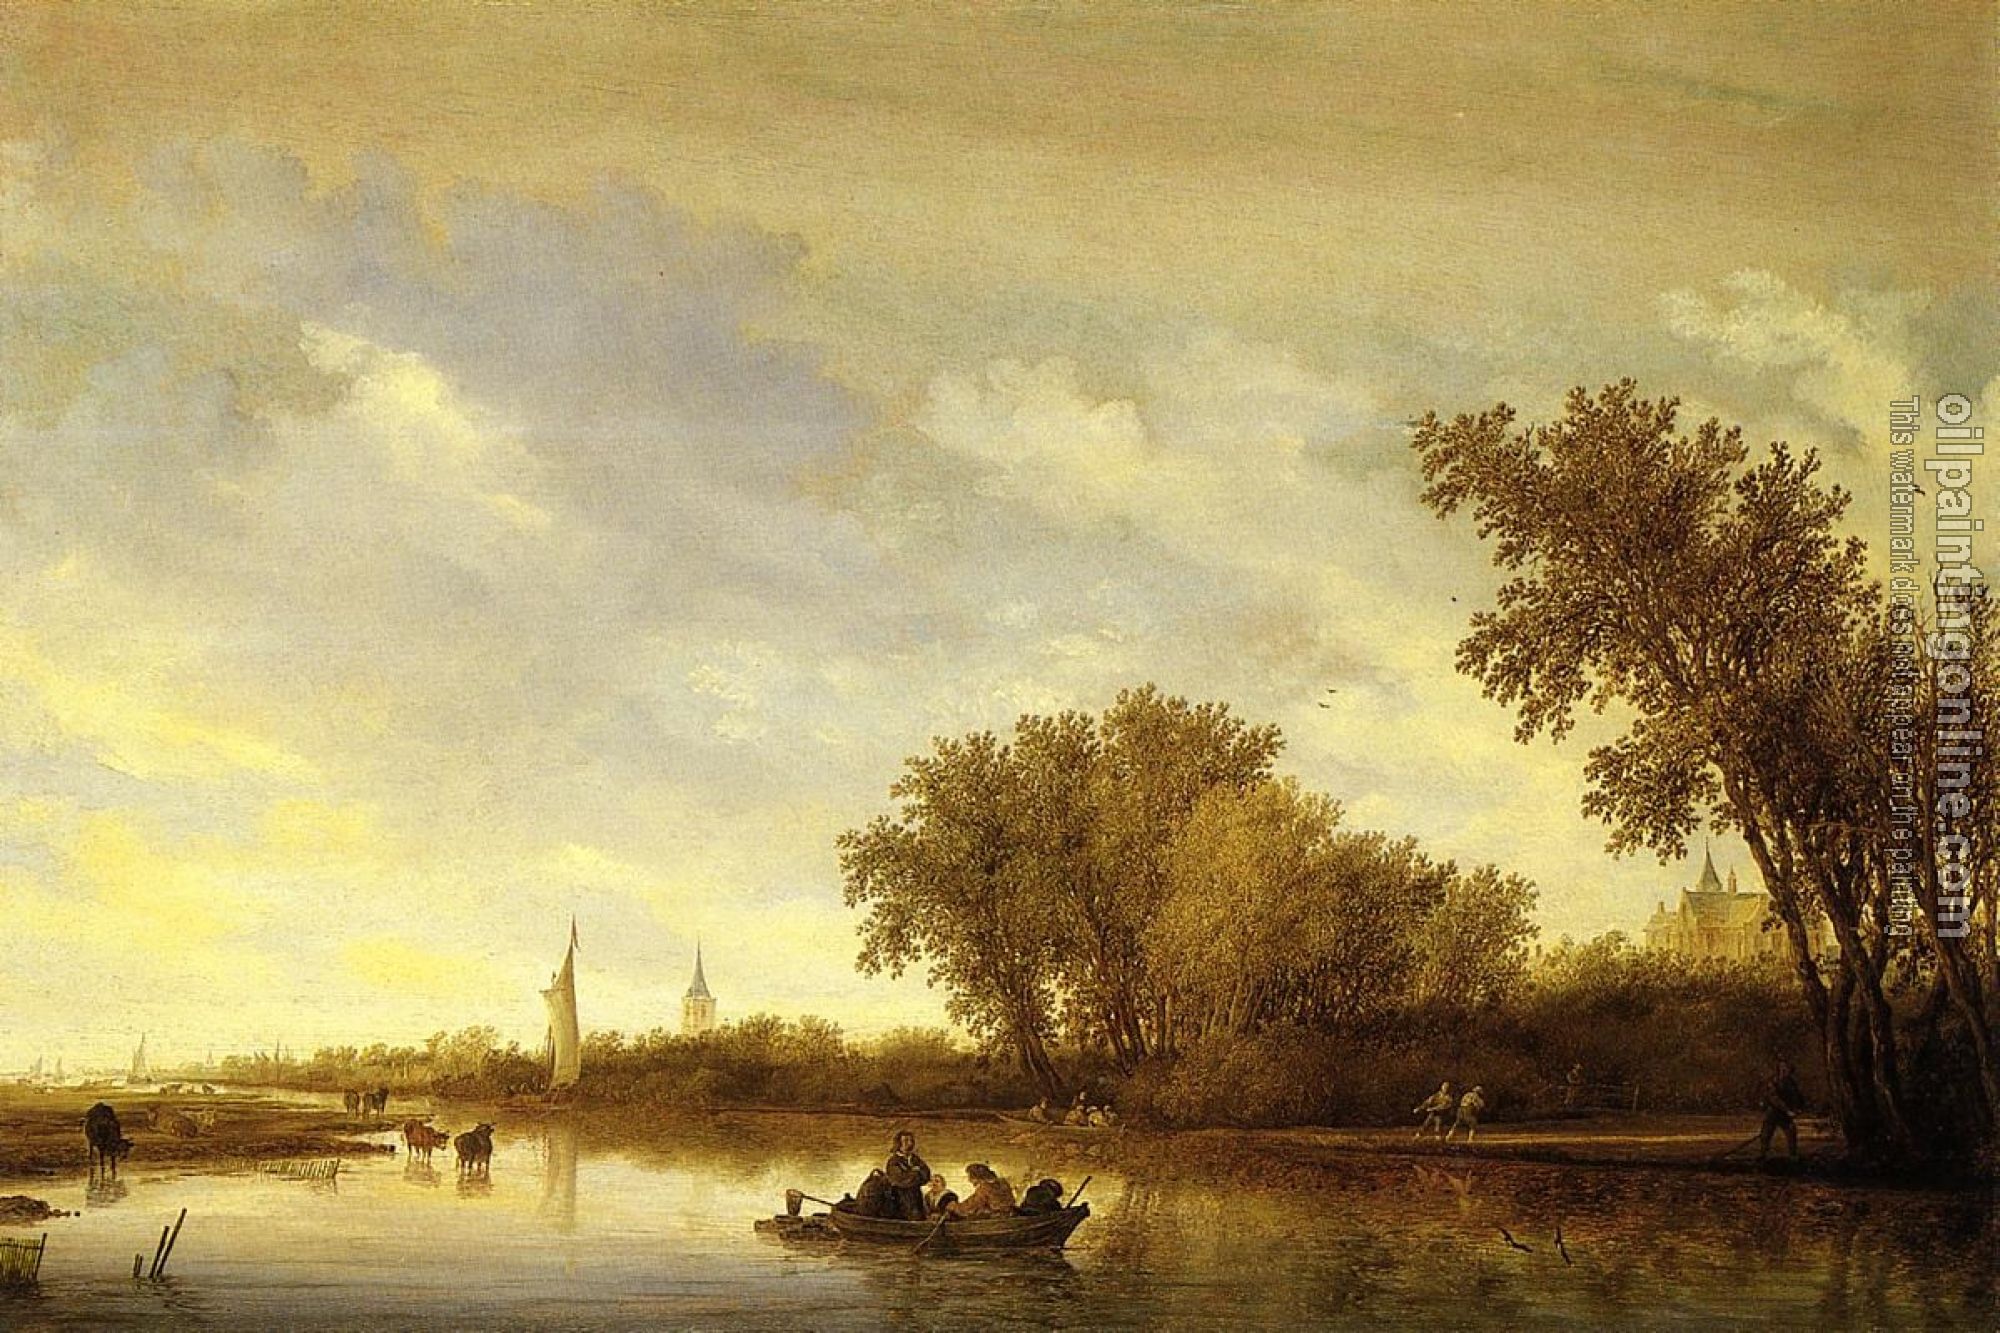 Ruysdael, Salomon van - A River Landscape with Boats and Chateau